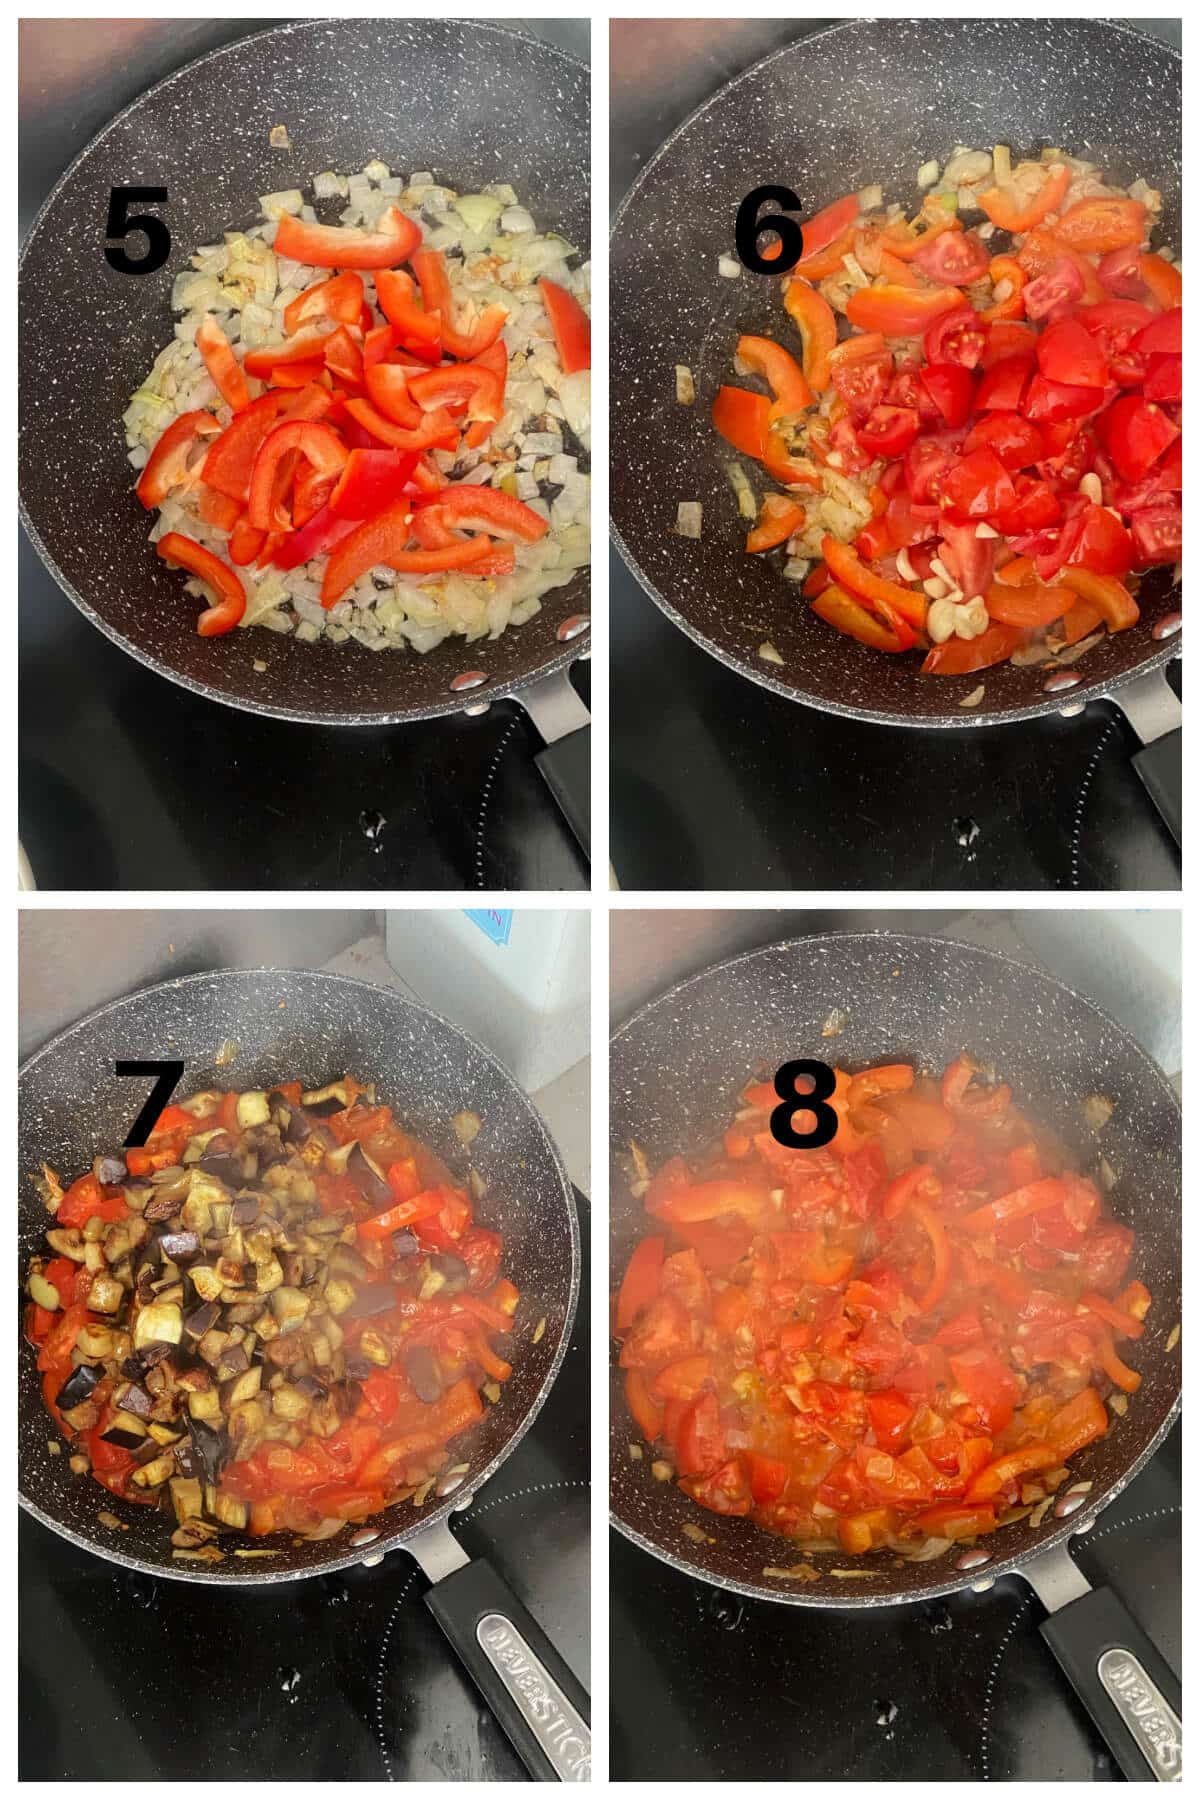 Collage of 4 photos to show how to make shakshuka with aubergines.